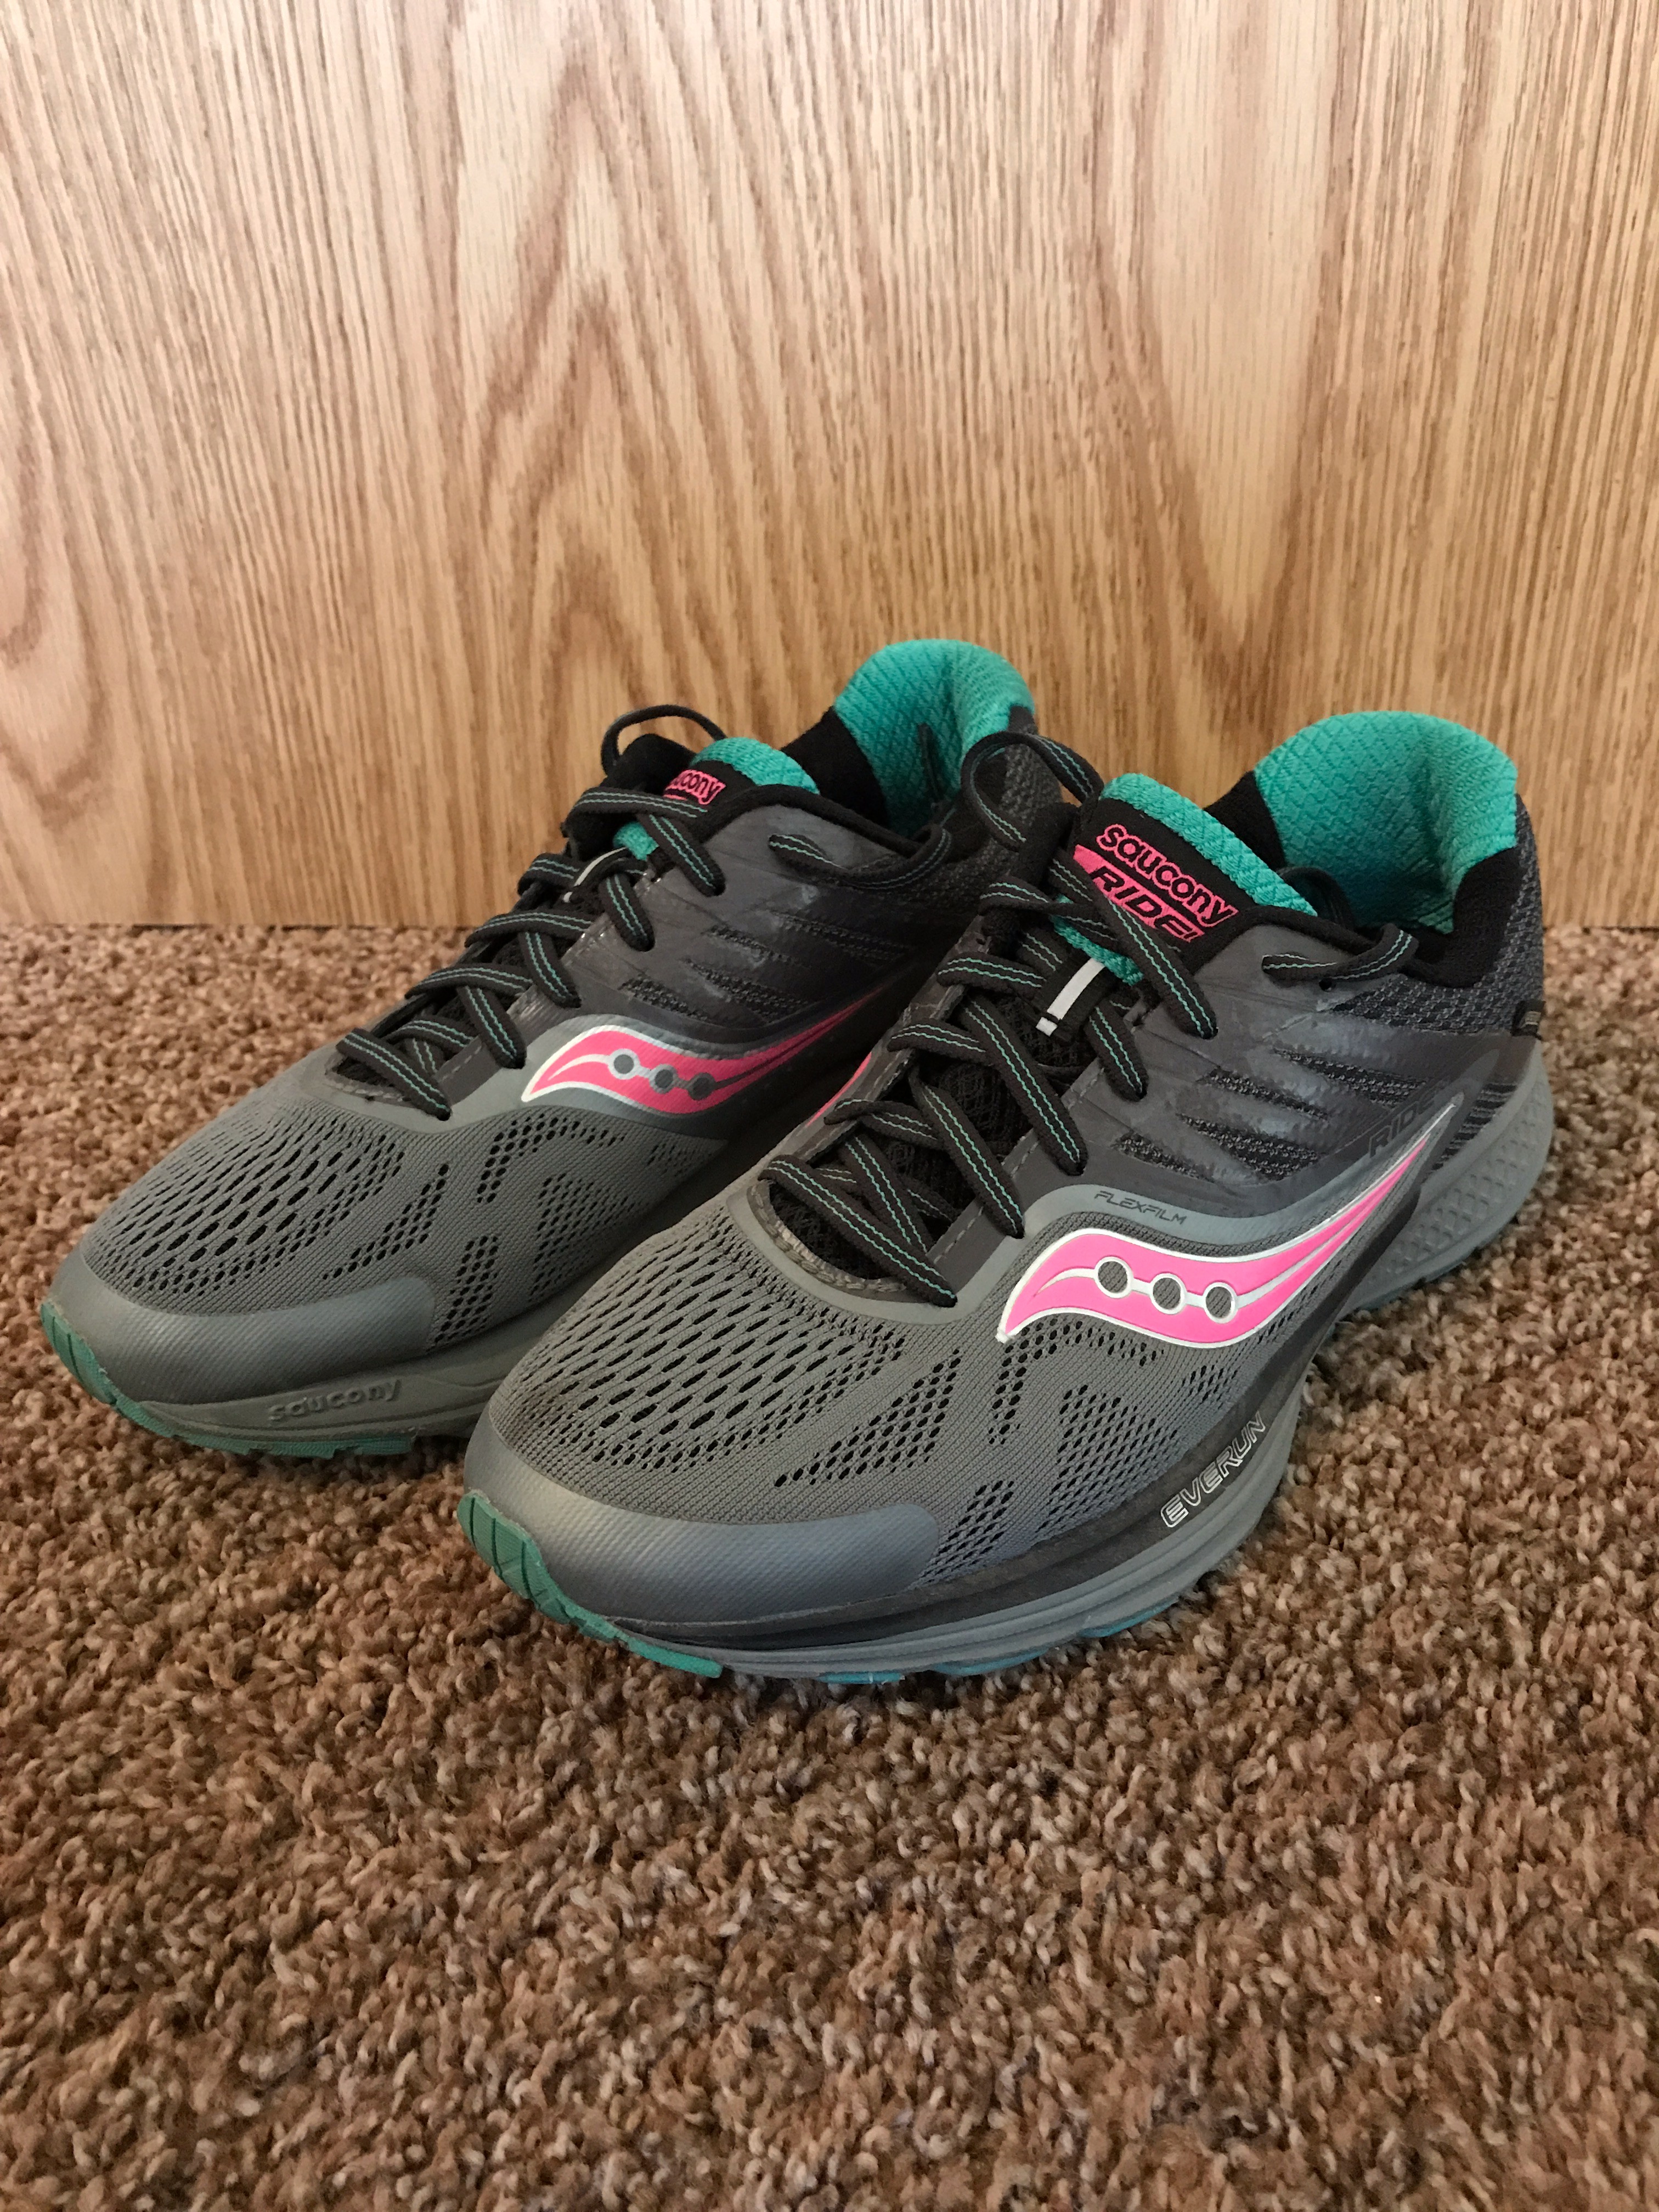 Product Review: Saucony Ride GTX - The 